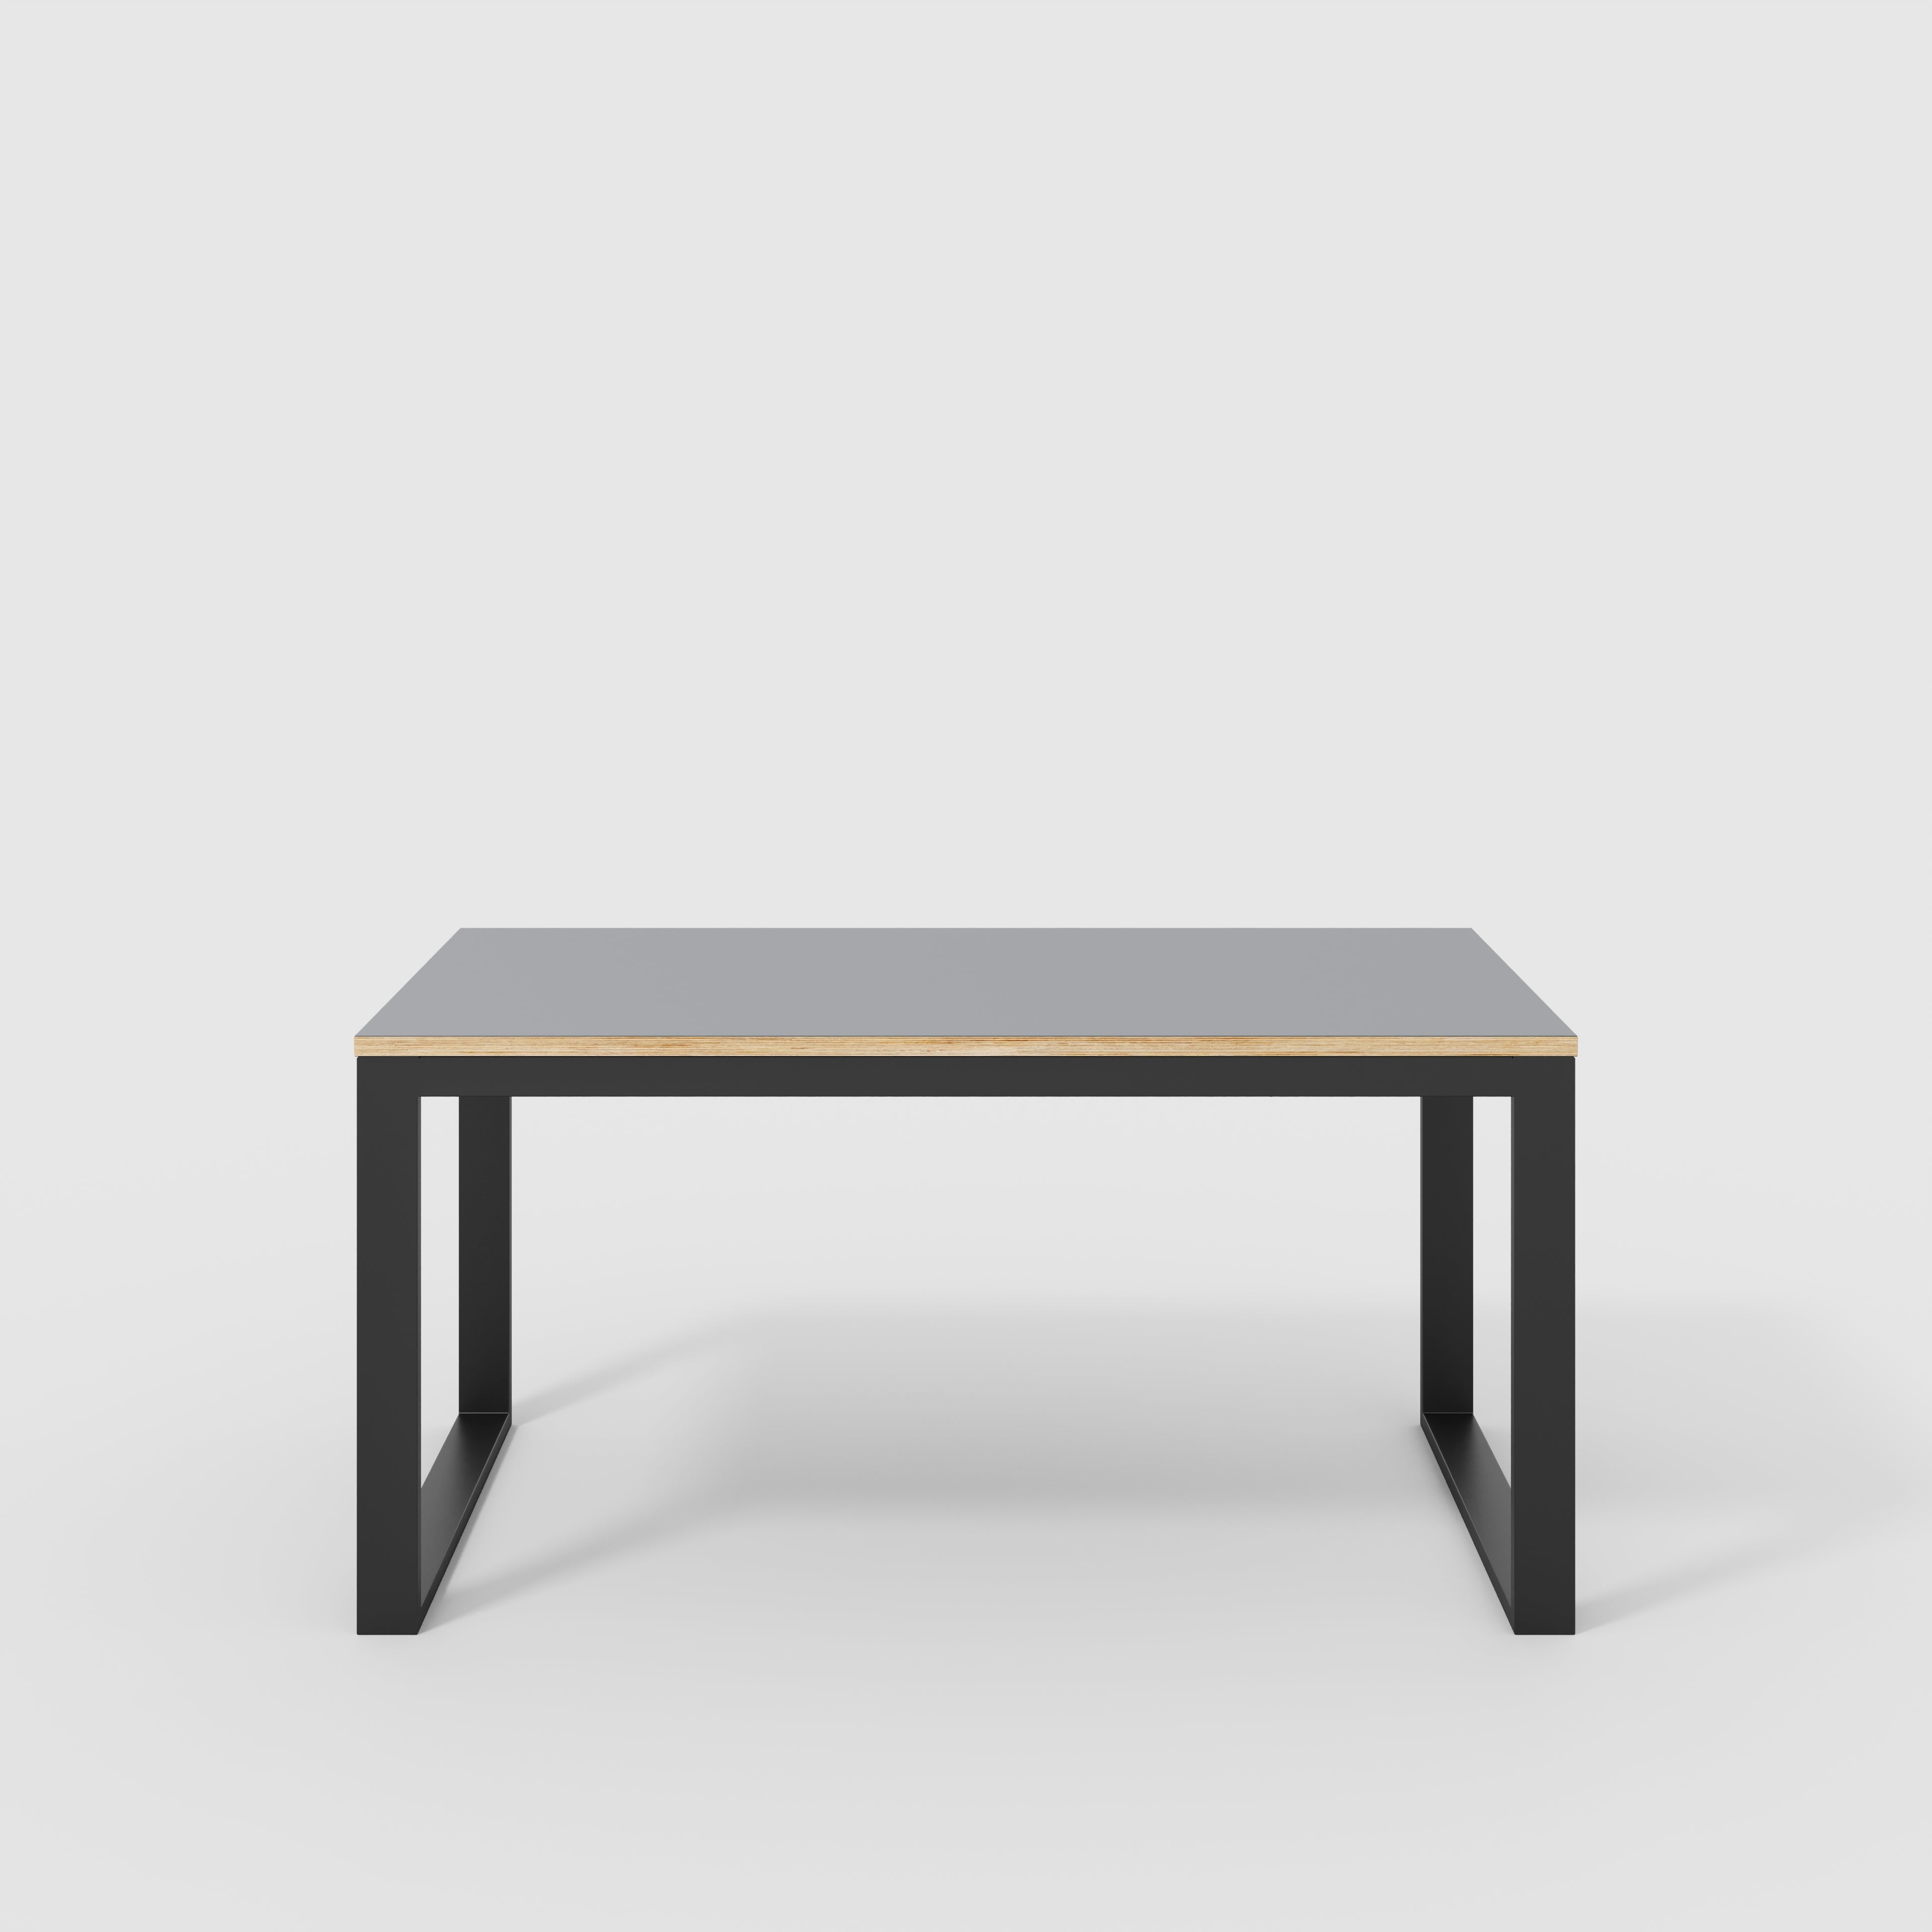 Table with Black Industrial Frame - Formica Tornado Grey - 1500(w) x 745(d) x 735(h)